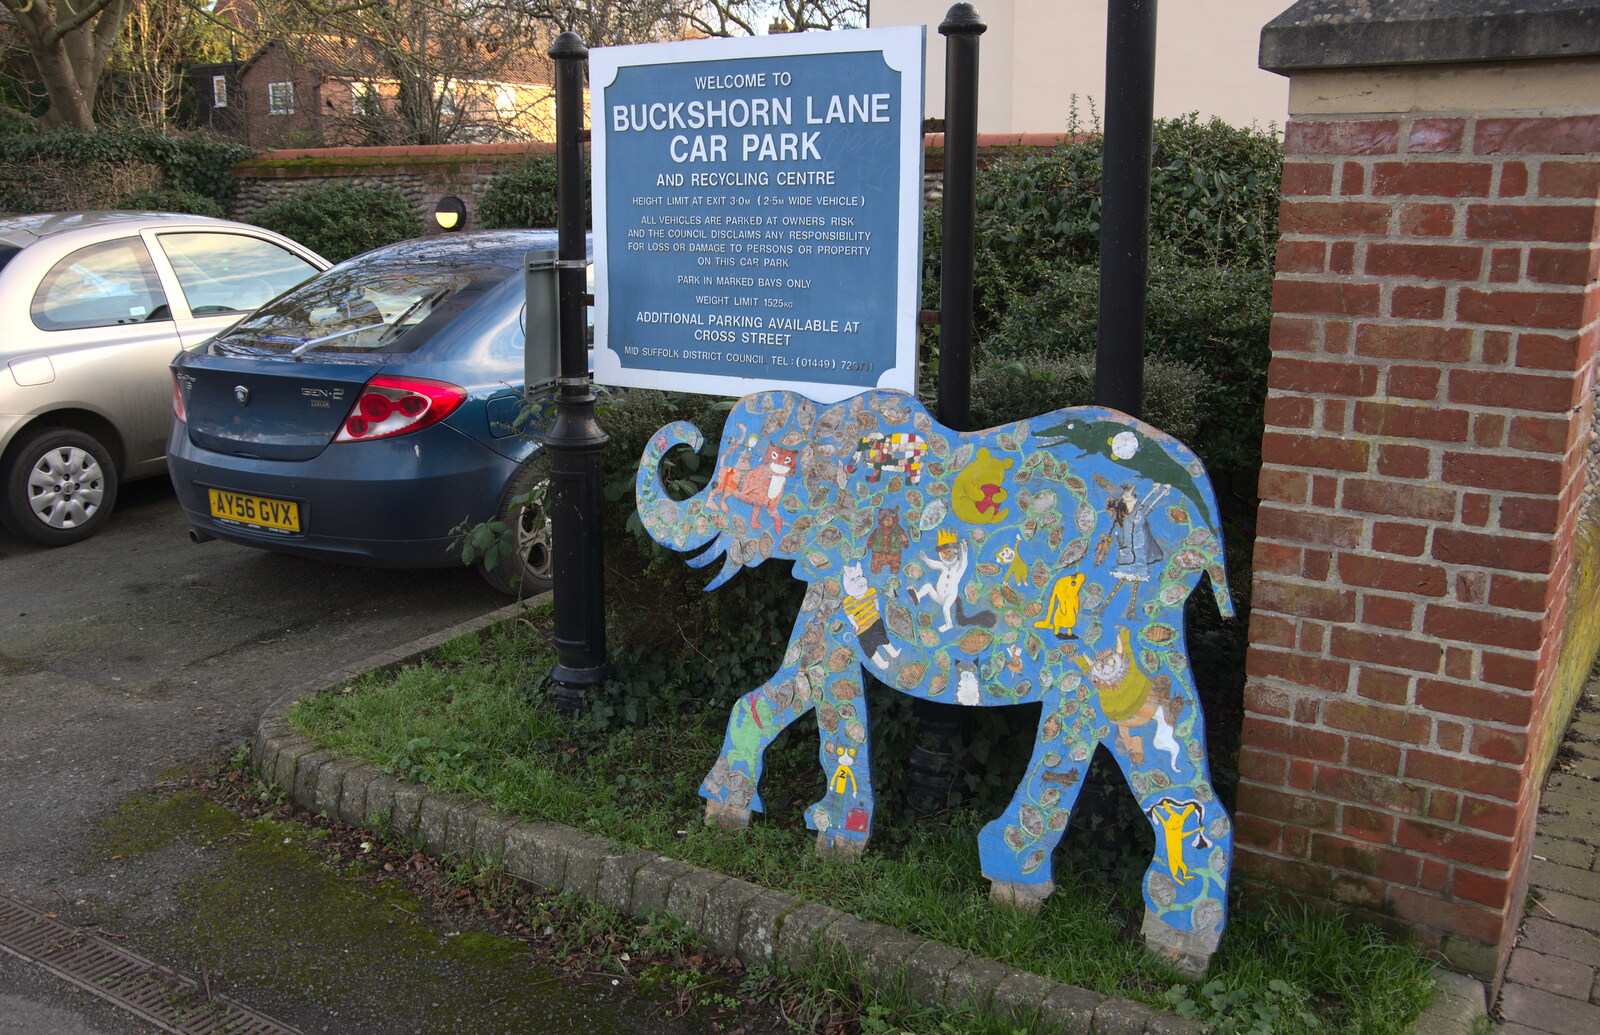 The elephant is now in the car park from A Wintry Trip Down South, Walkford, Dorset - 1st February 2019